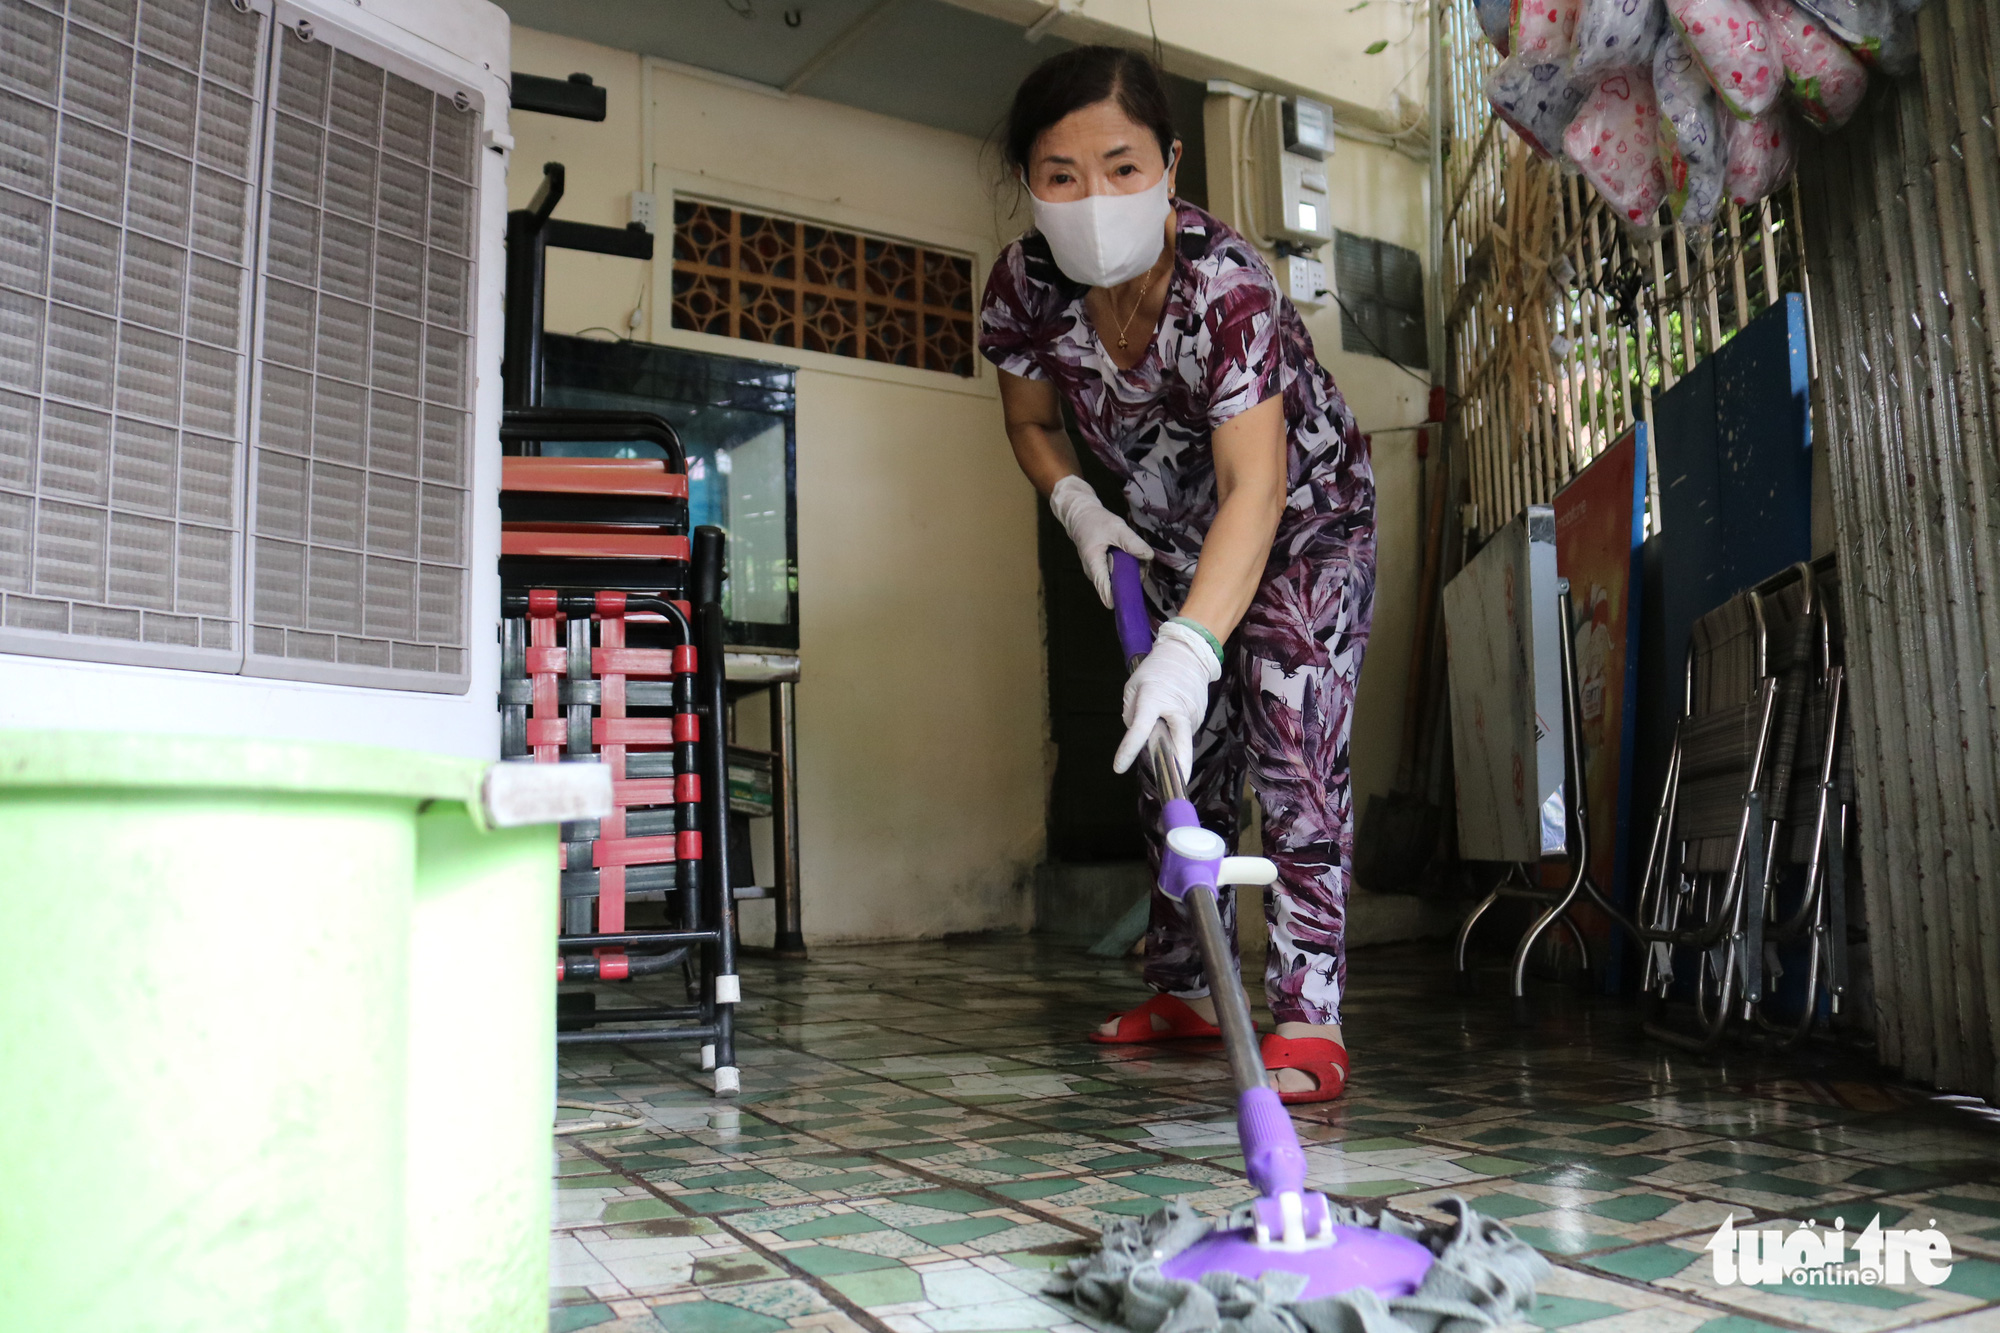 Eatery owner Chung Thi Vui cleans the venue to prepare for reopening after the announcement of eased social distancing measures in Ho Chi Minh City, Vietnam, April 22, 2020. Photo: Ngoc Phuong / Tuoi Tre